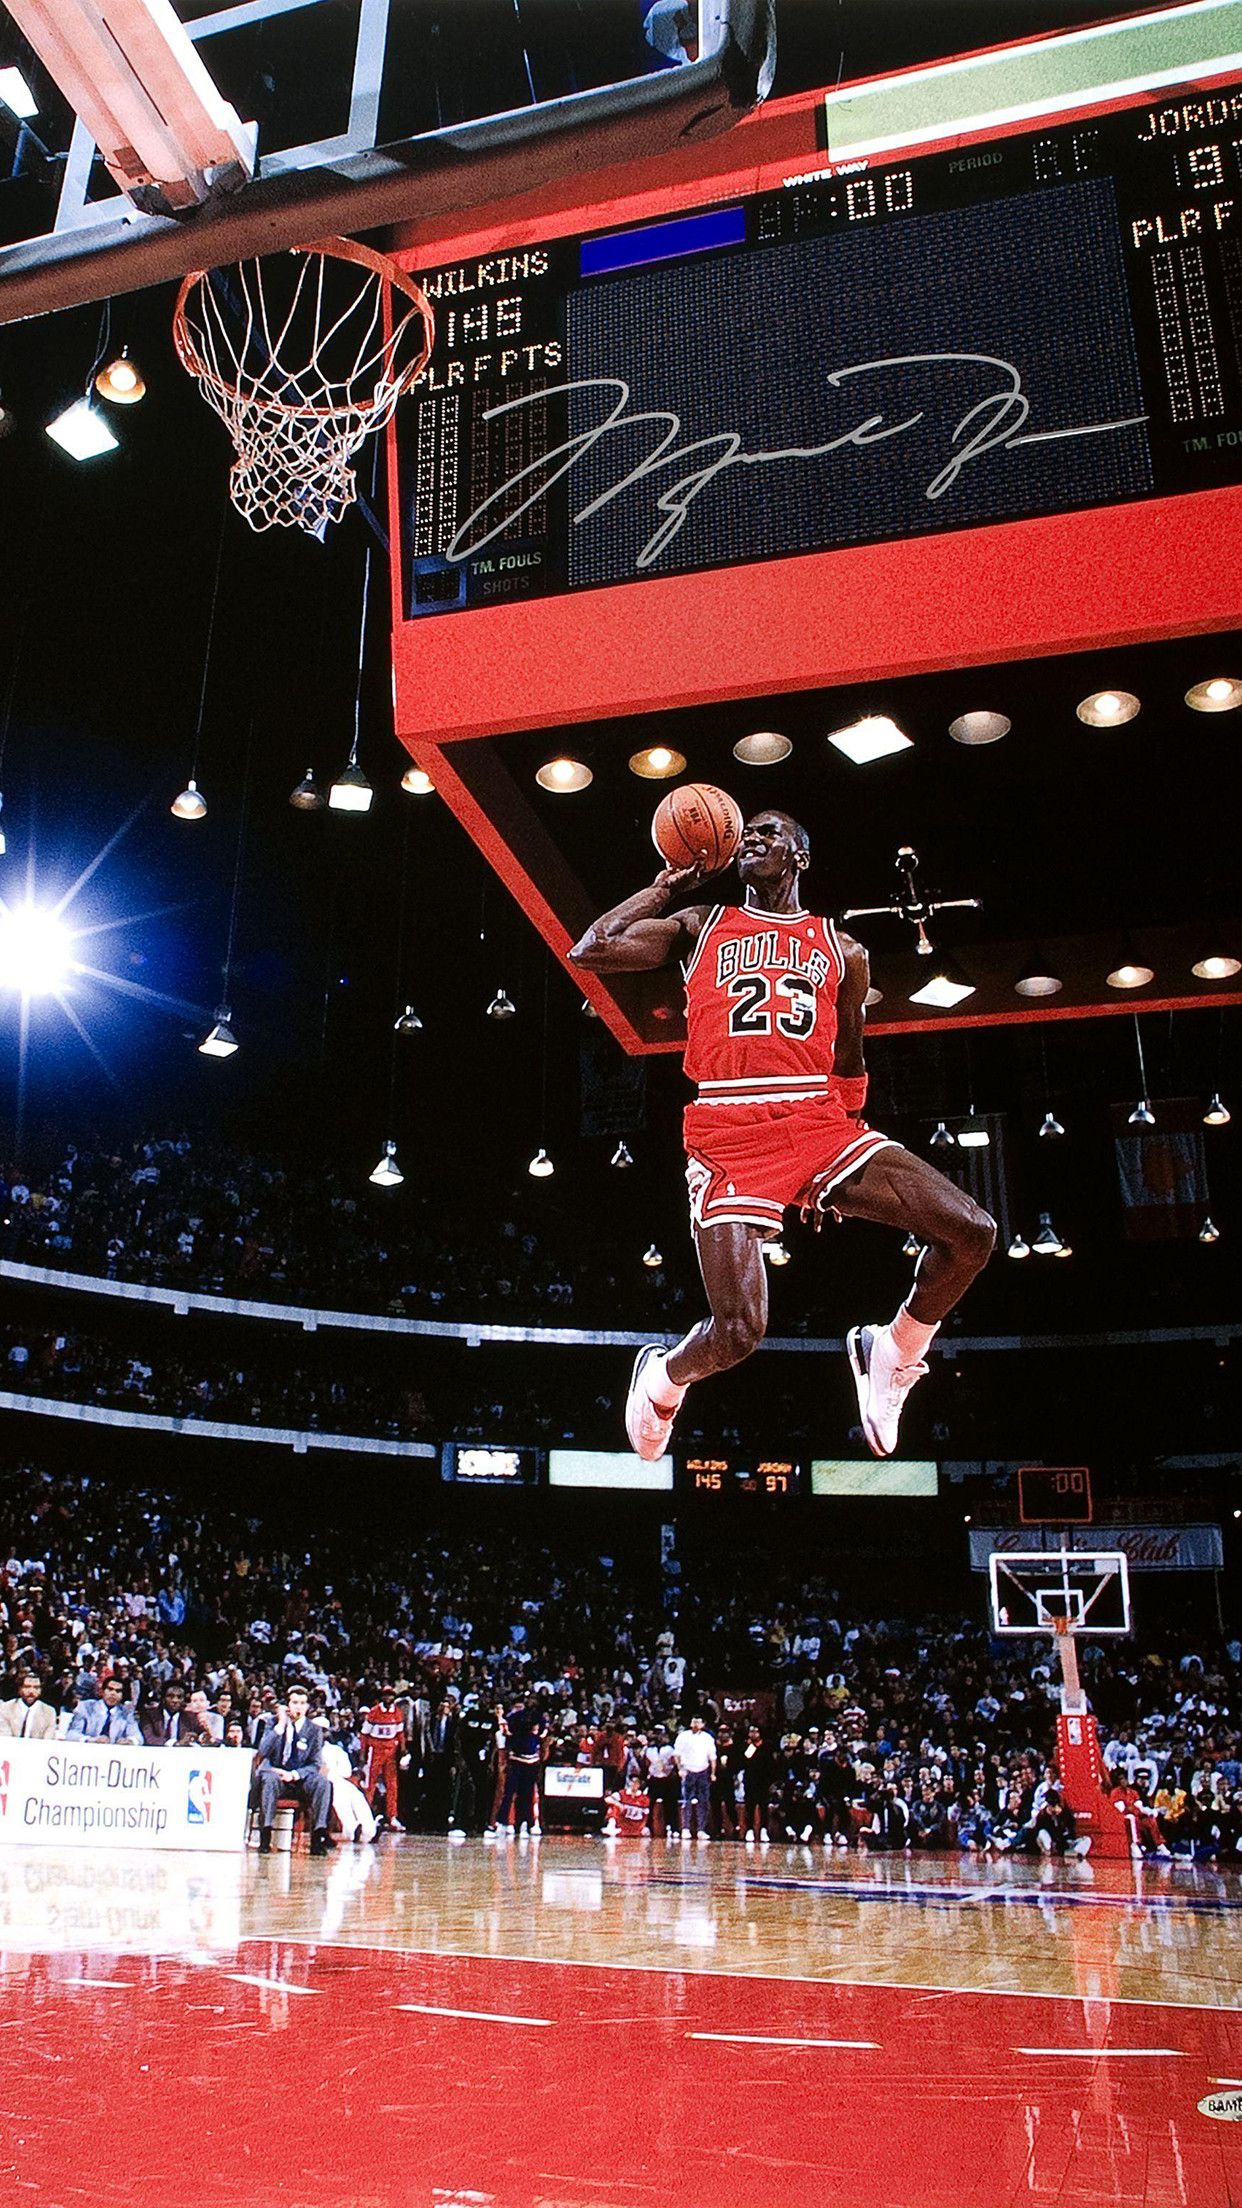 Michael Jordan in the middle of a dunk. - NBA